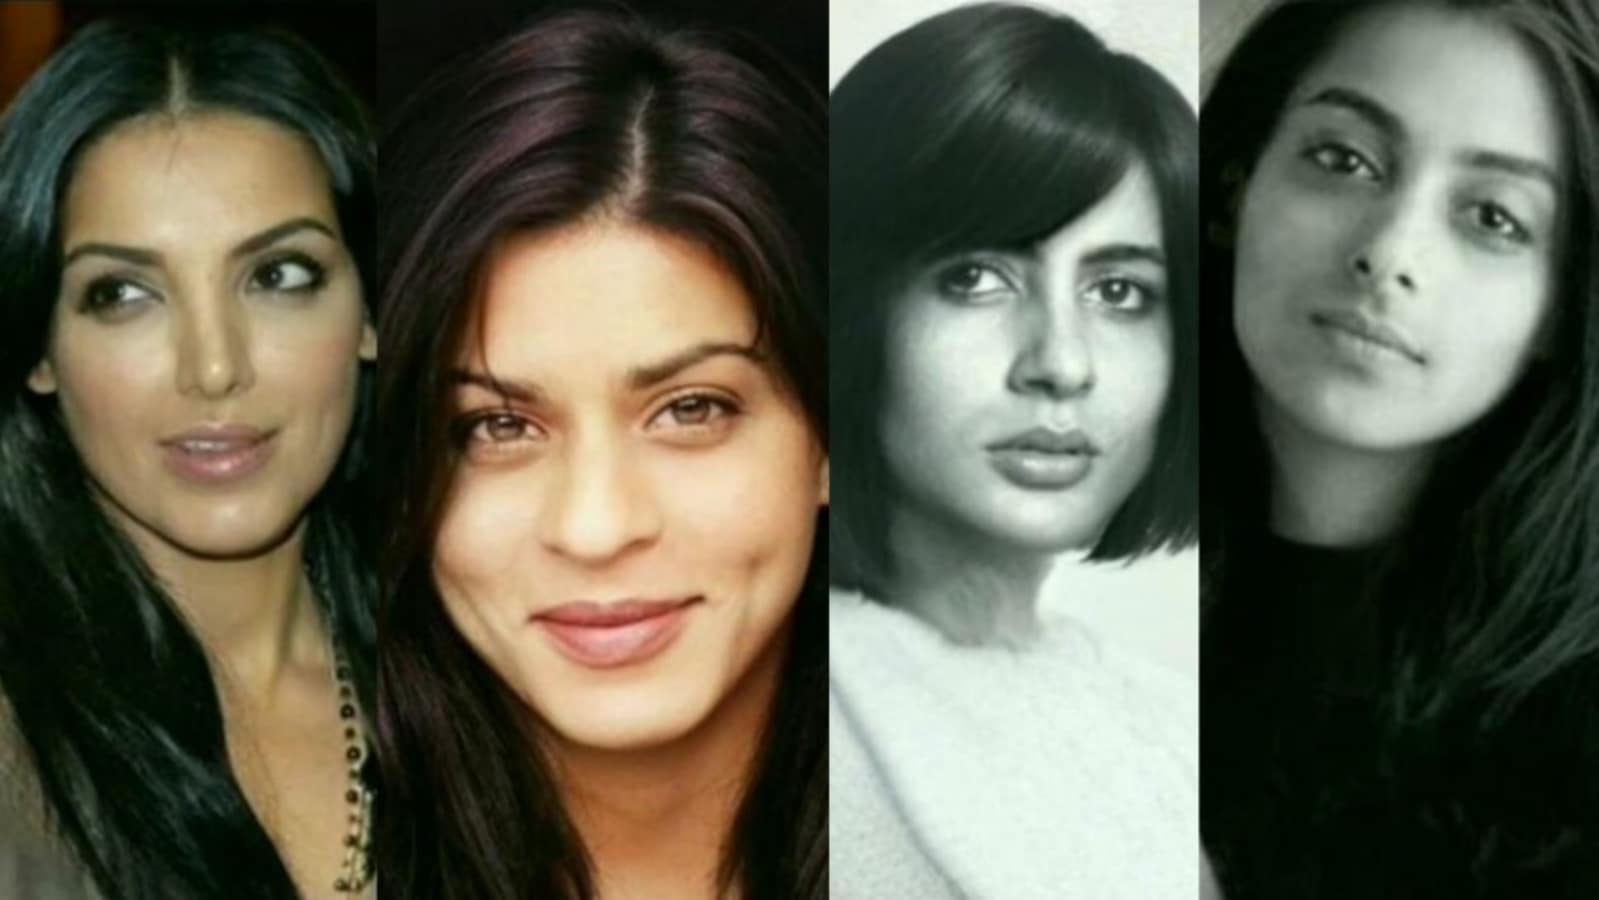 Reddit video imagines what Bollywood superstars would look like as women Bollywood